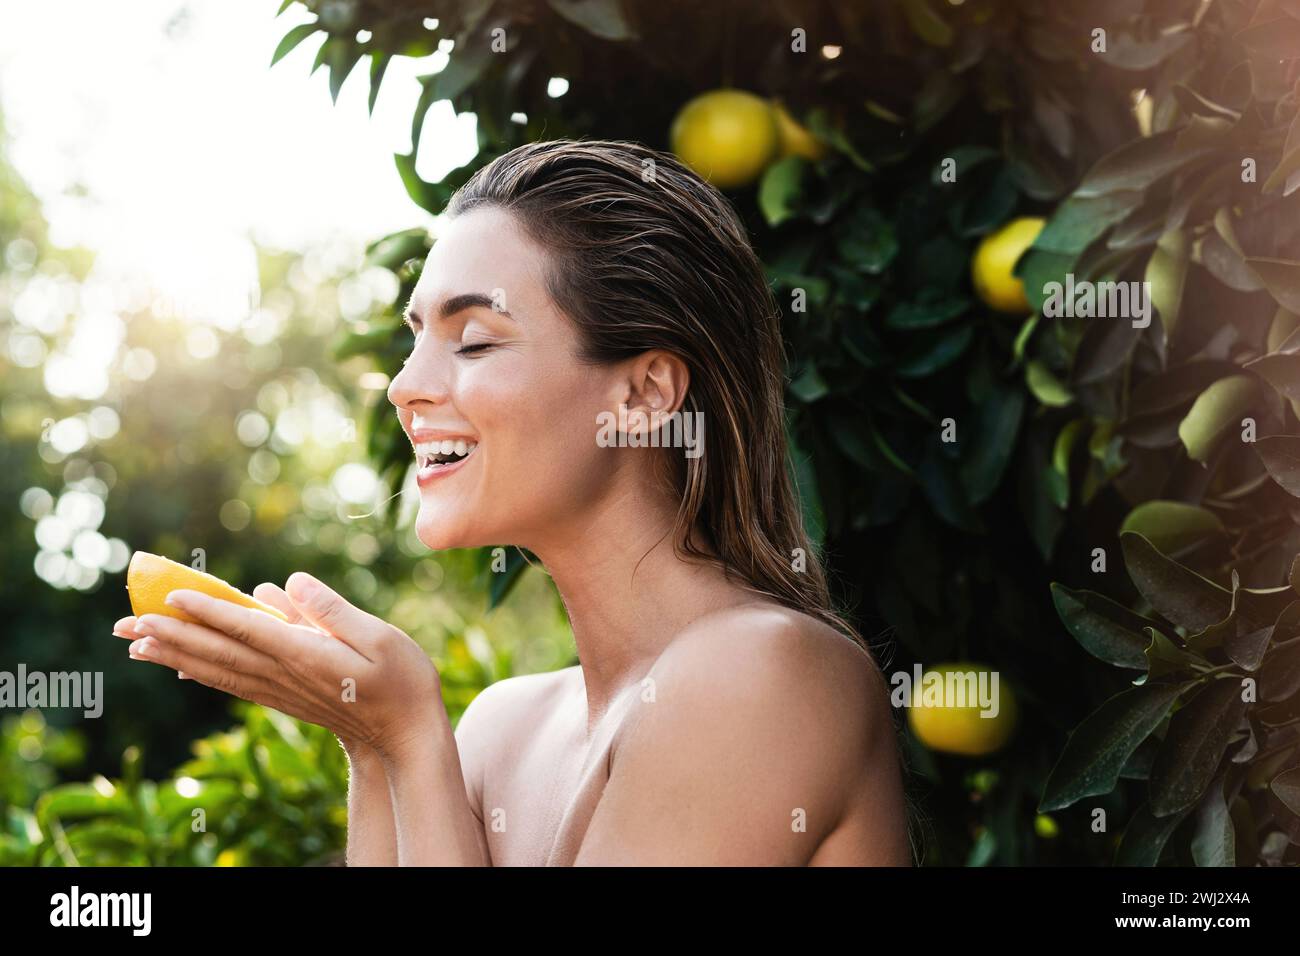 Beautiful woman with smooth skin with a lemon fruit in her hands Stock Photo